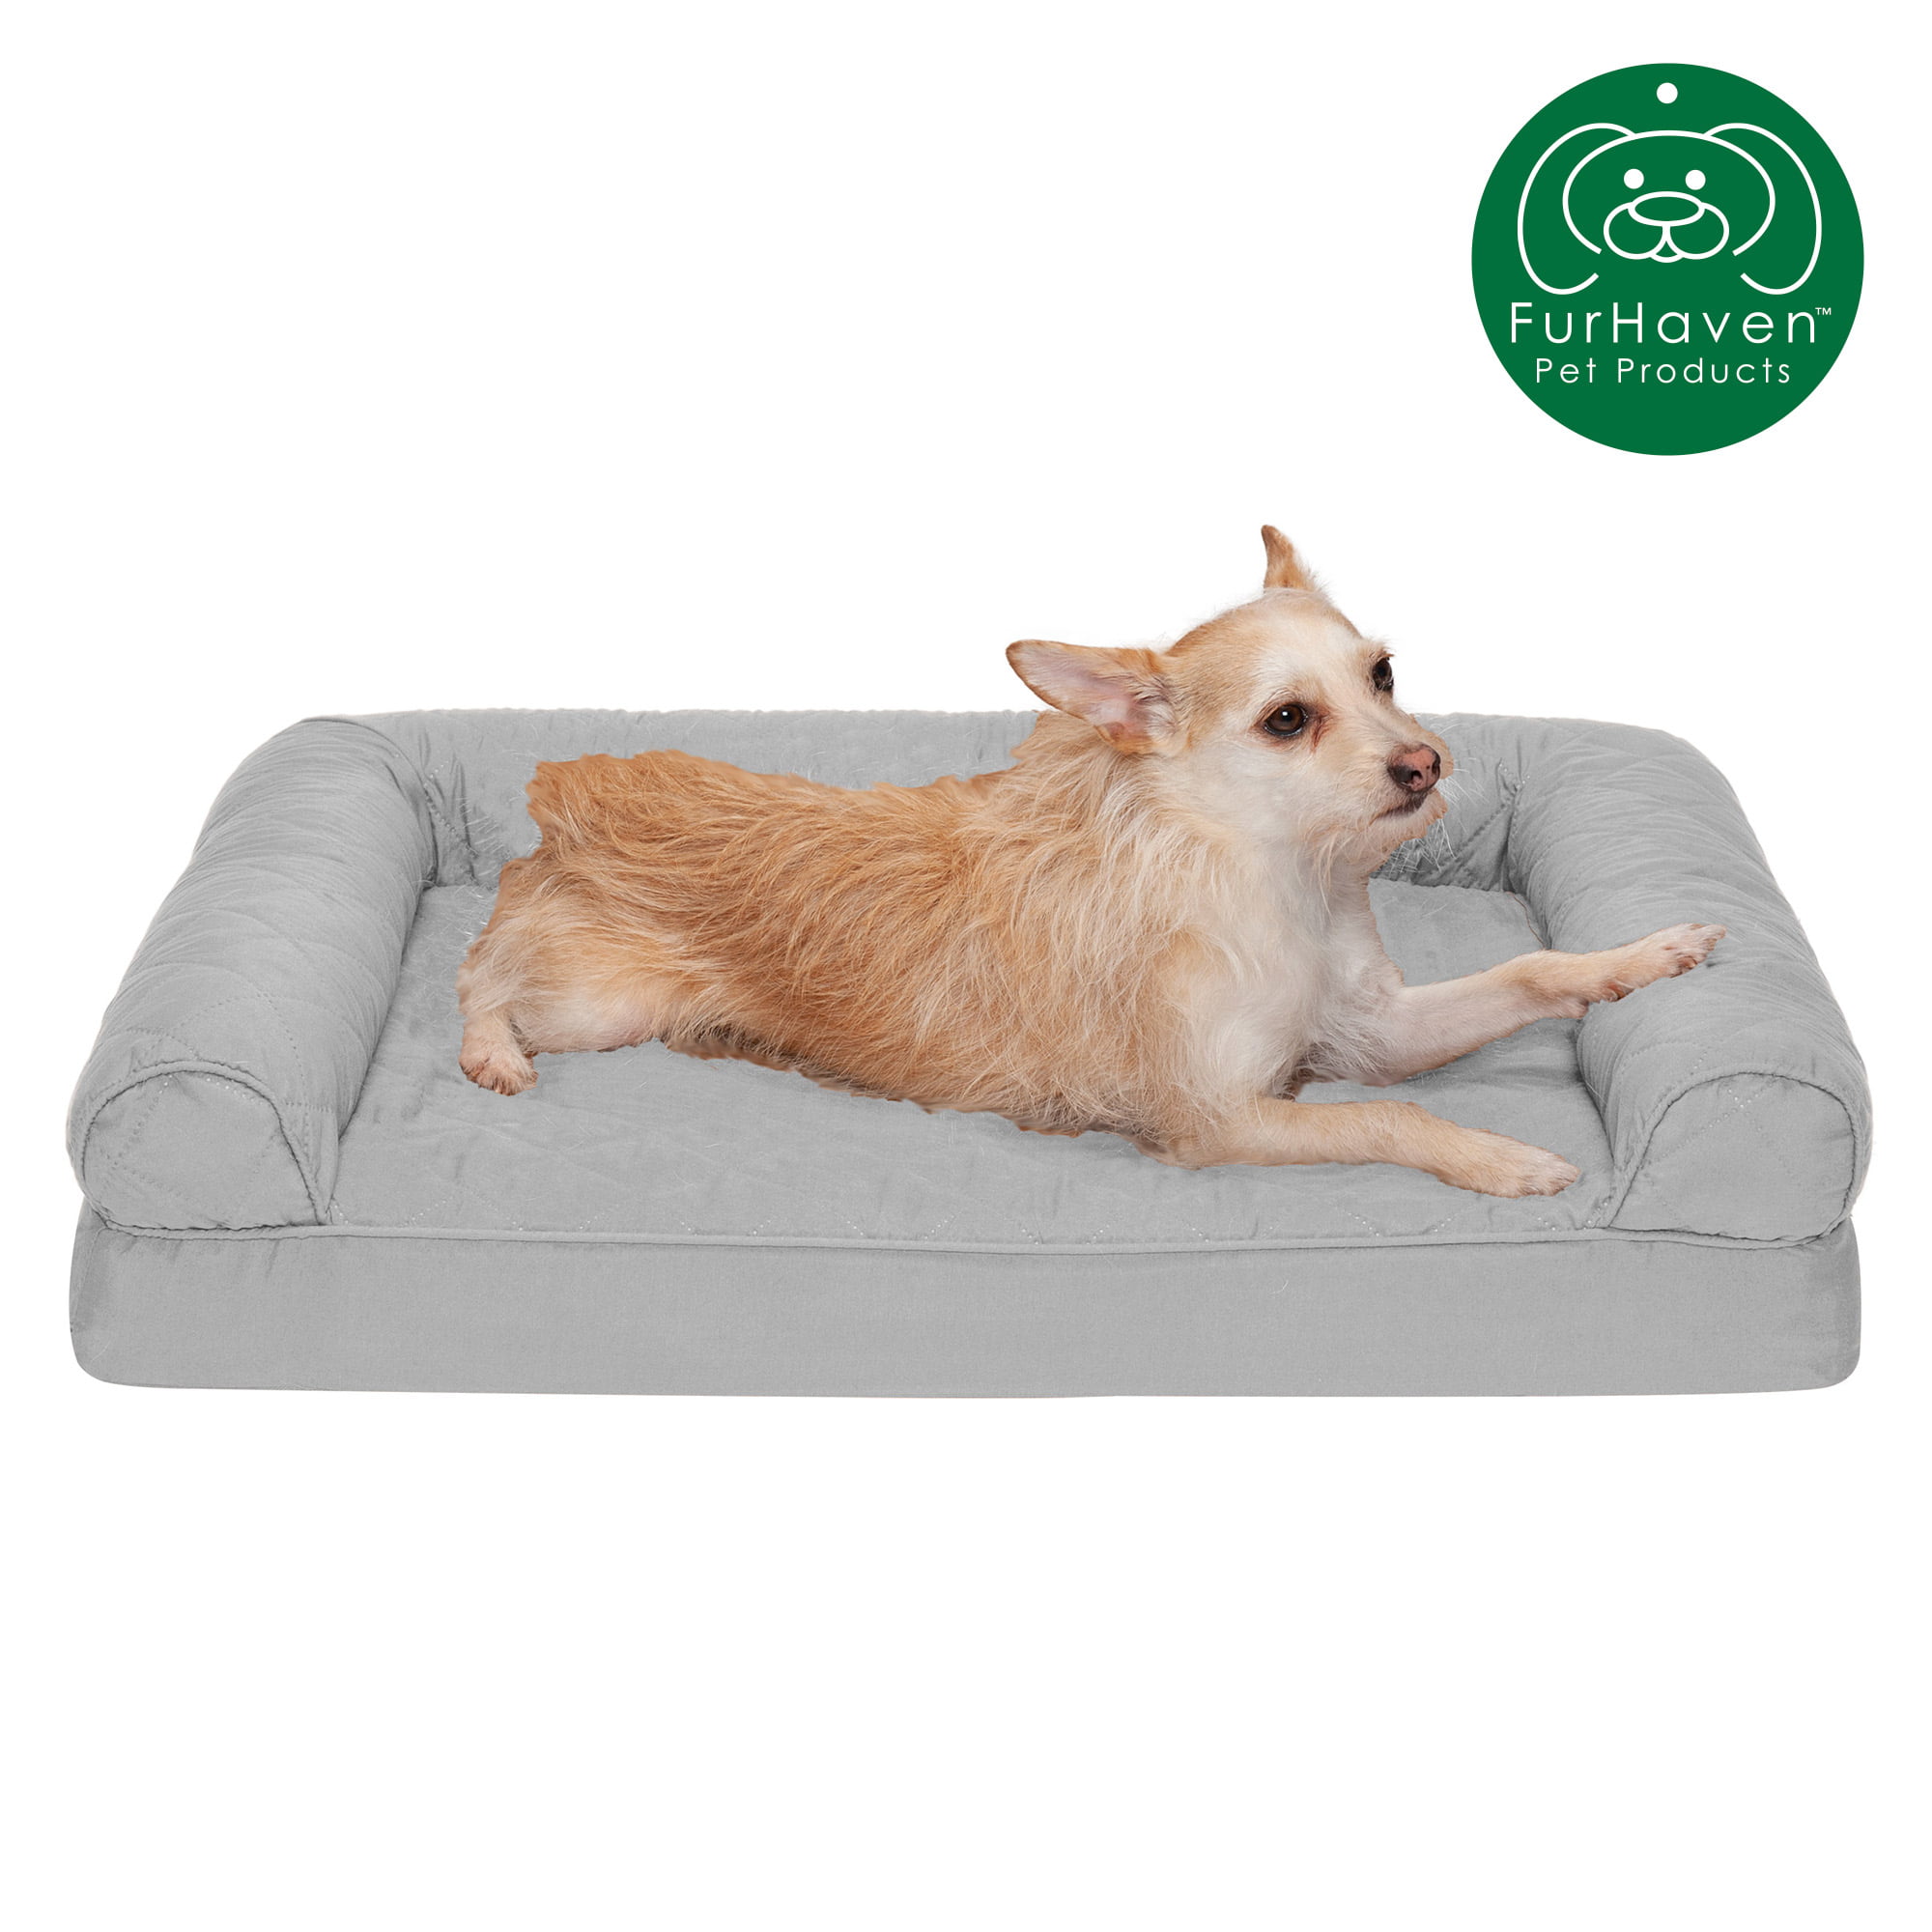 Multiple Colors Two-Tone L Shaped Corner Sofa Couch Orthopedic Dog Bed and More for Dogs and Cats Plush Living Room Sofa-Style Orthopedic Dog Bed and Styles Sizes Furhaven Pet 